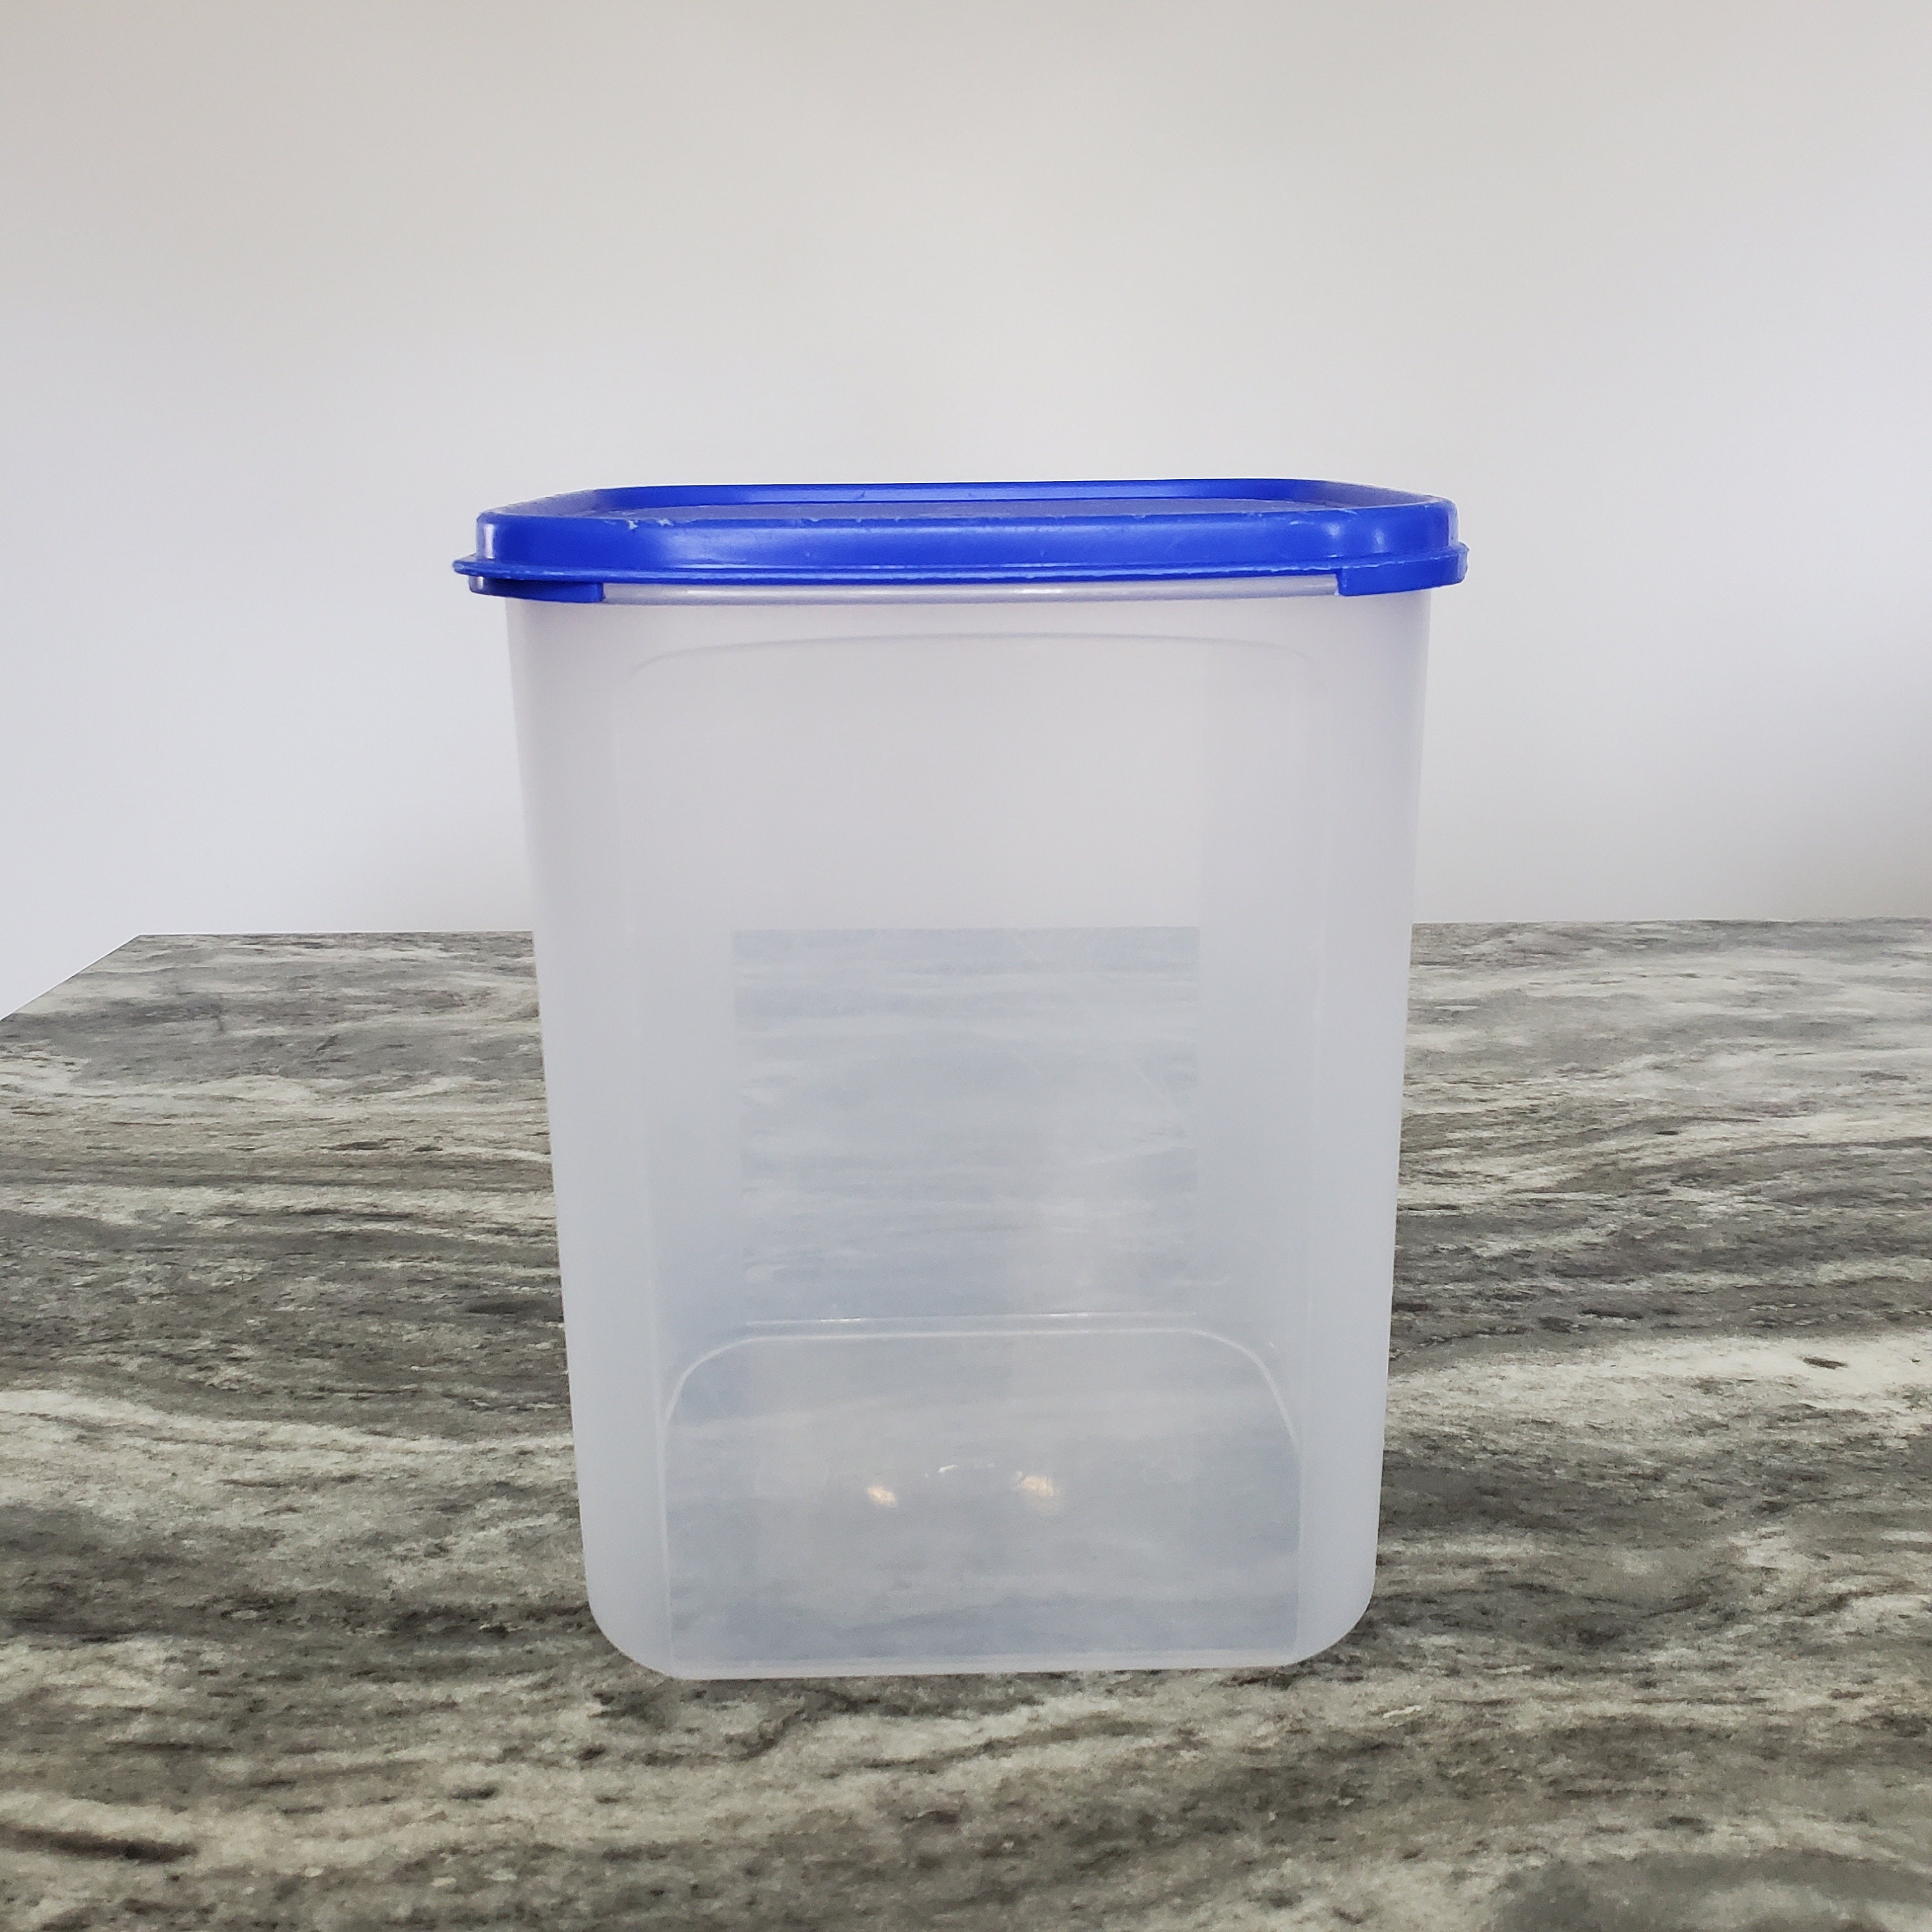 Tupperware Modular Mates 4 Square Storage Containers 1622 5.5L W/blue Lid 